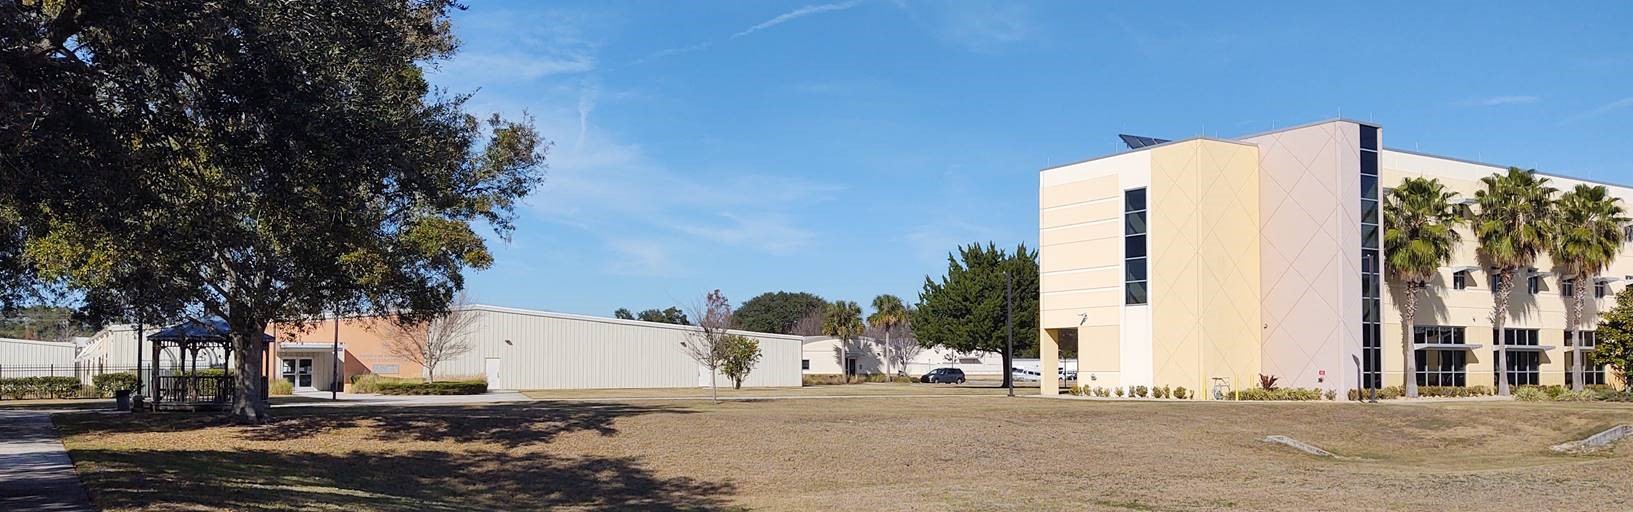 Panoramic view of the Florida Bureau of Braille and Talking Book Library and the Rehab Center.